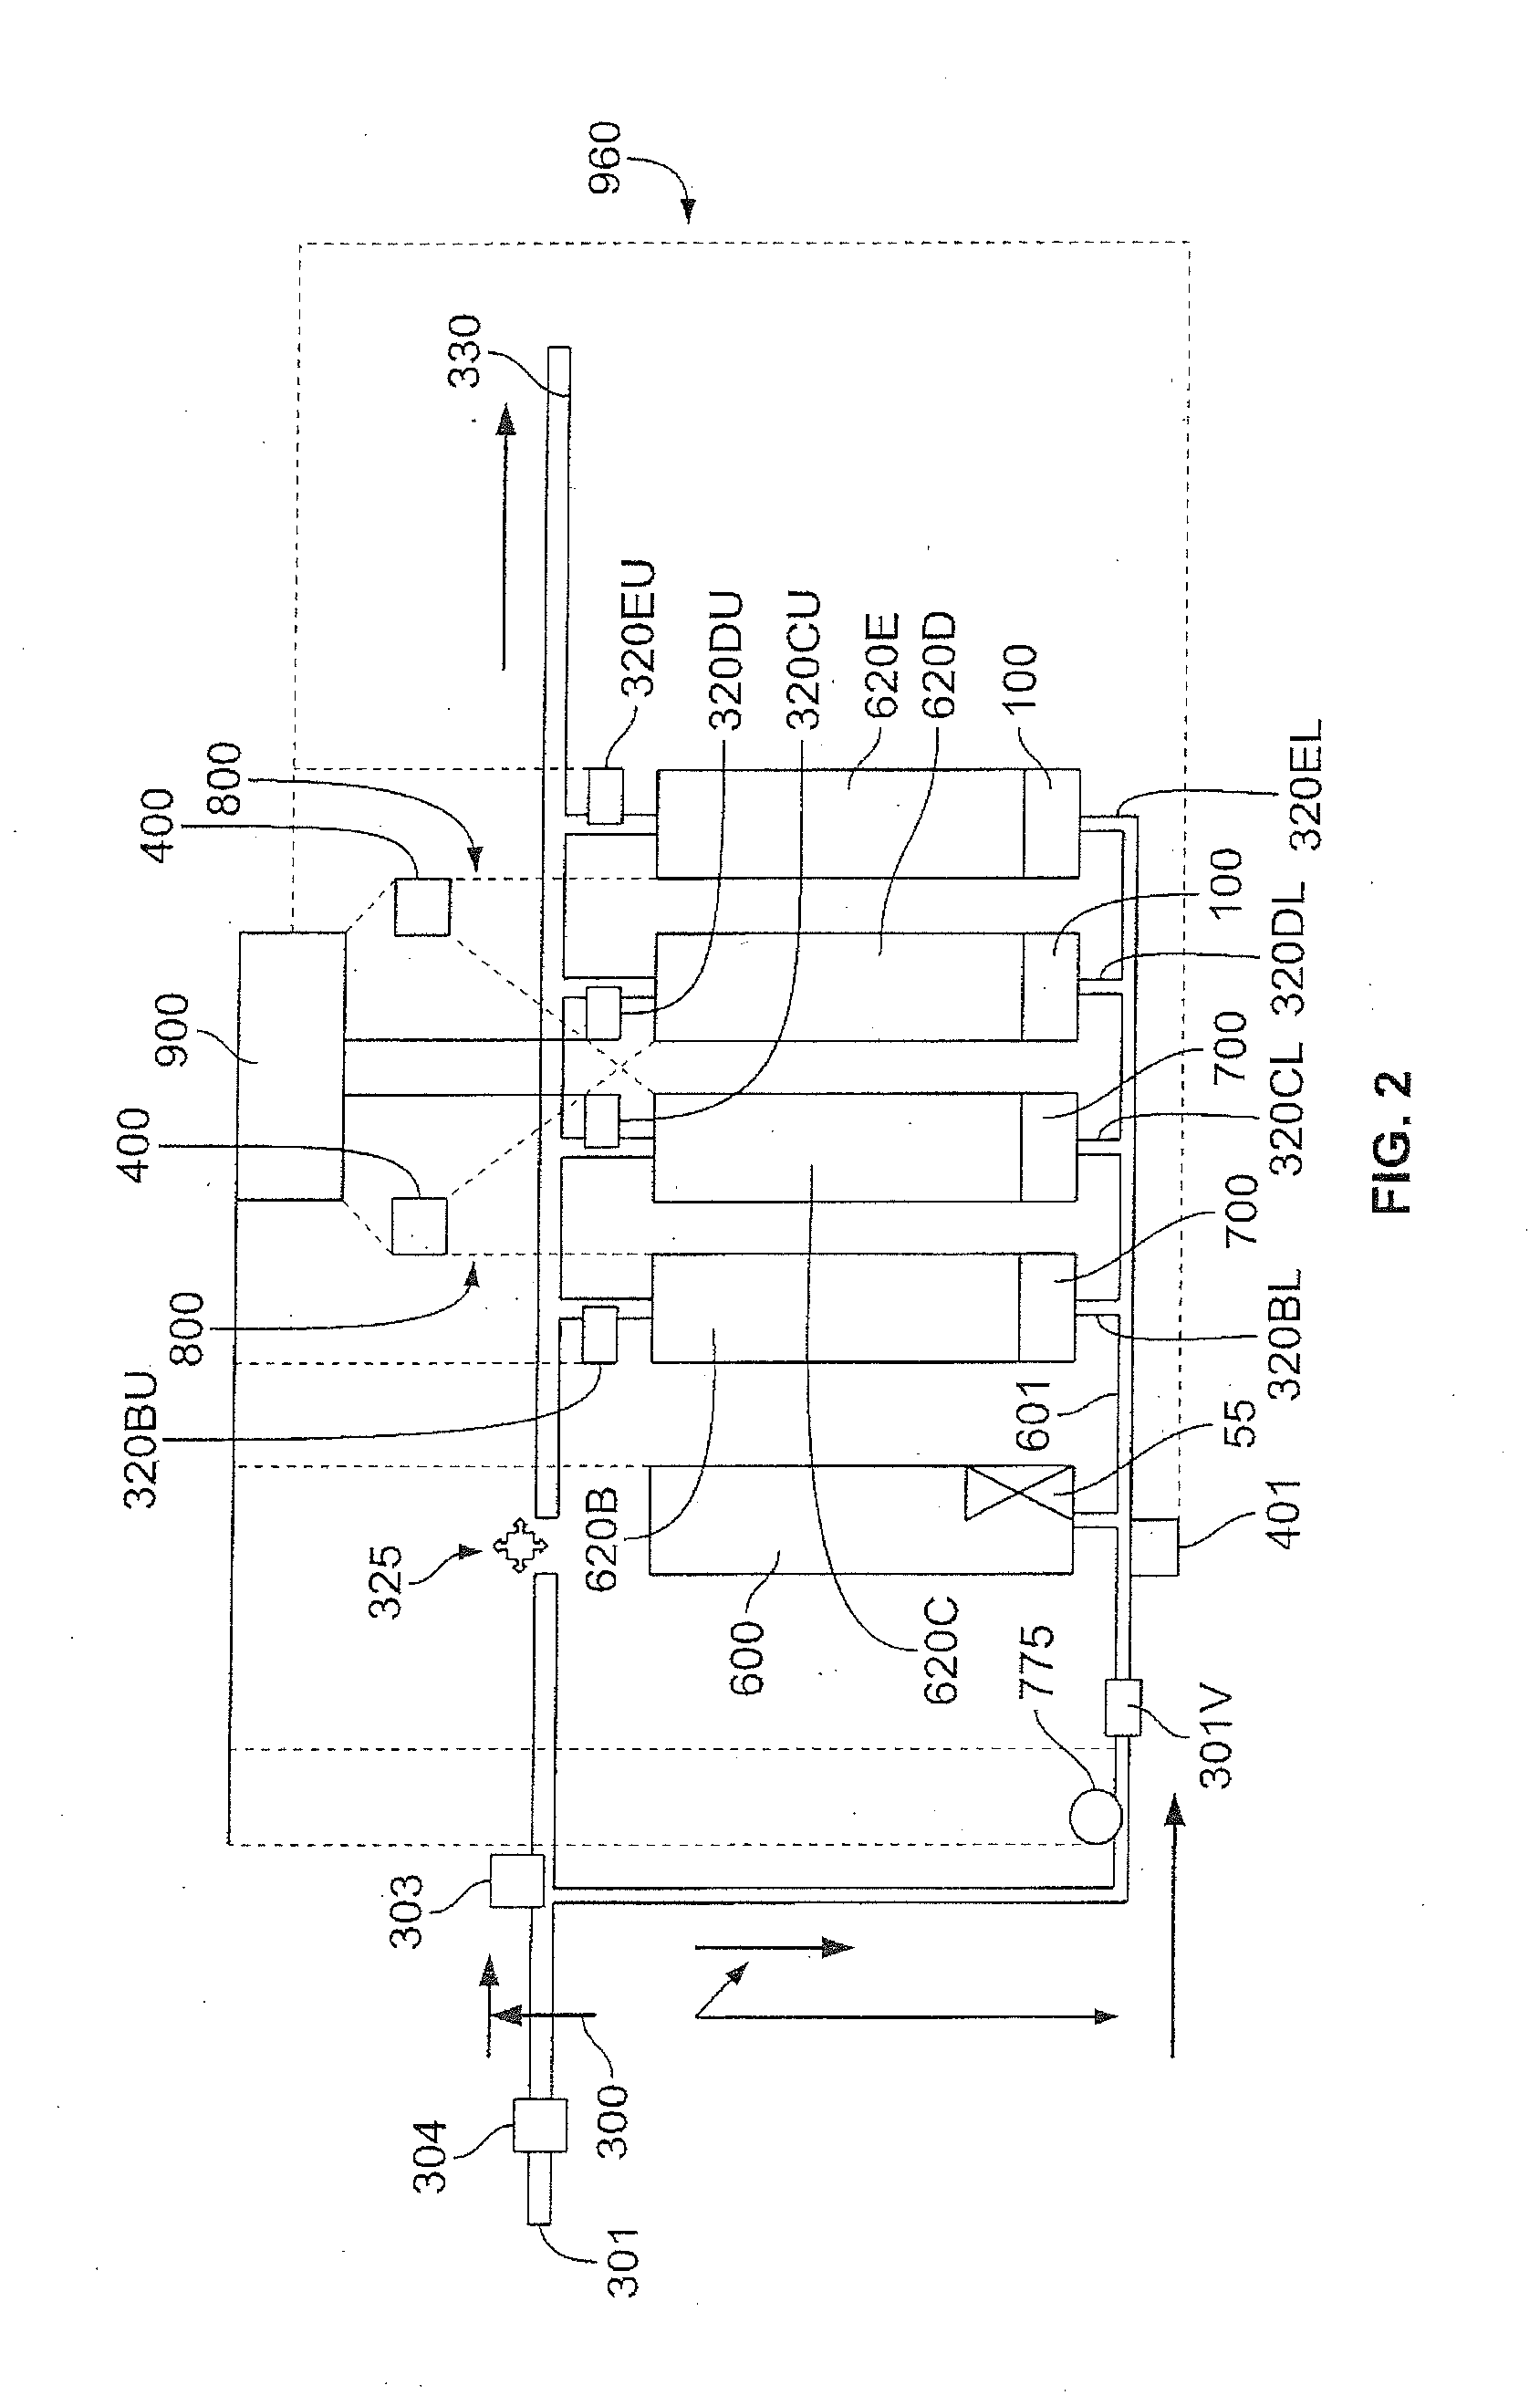 Modulating surface and aerosol iodine disinfectant system